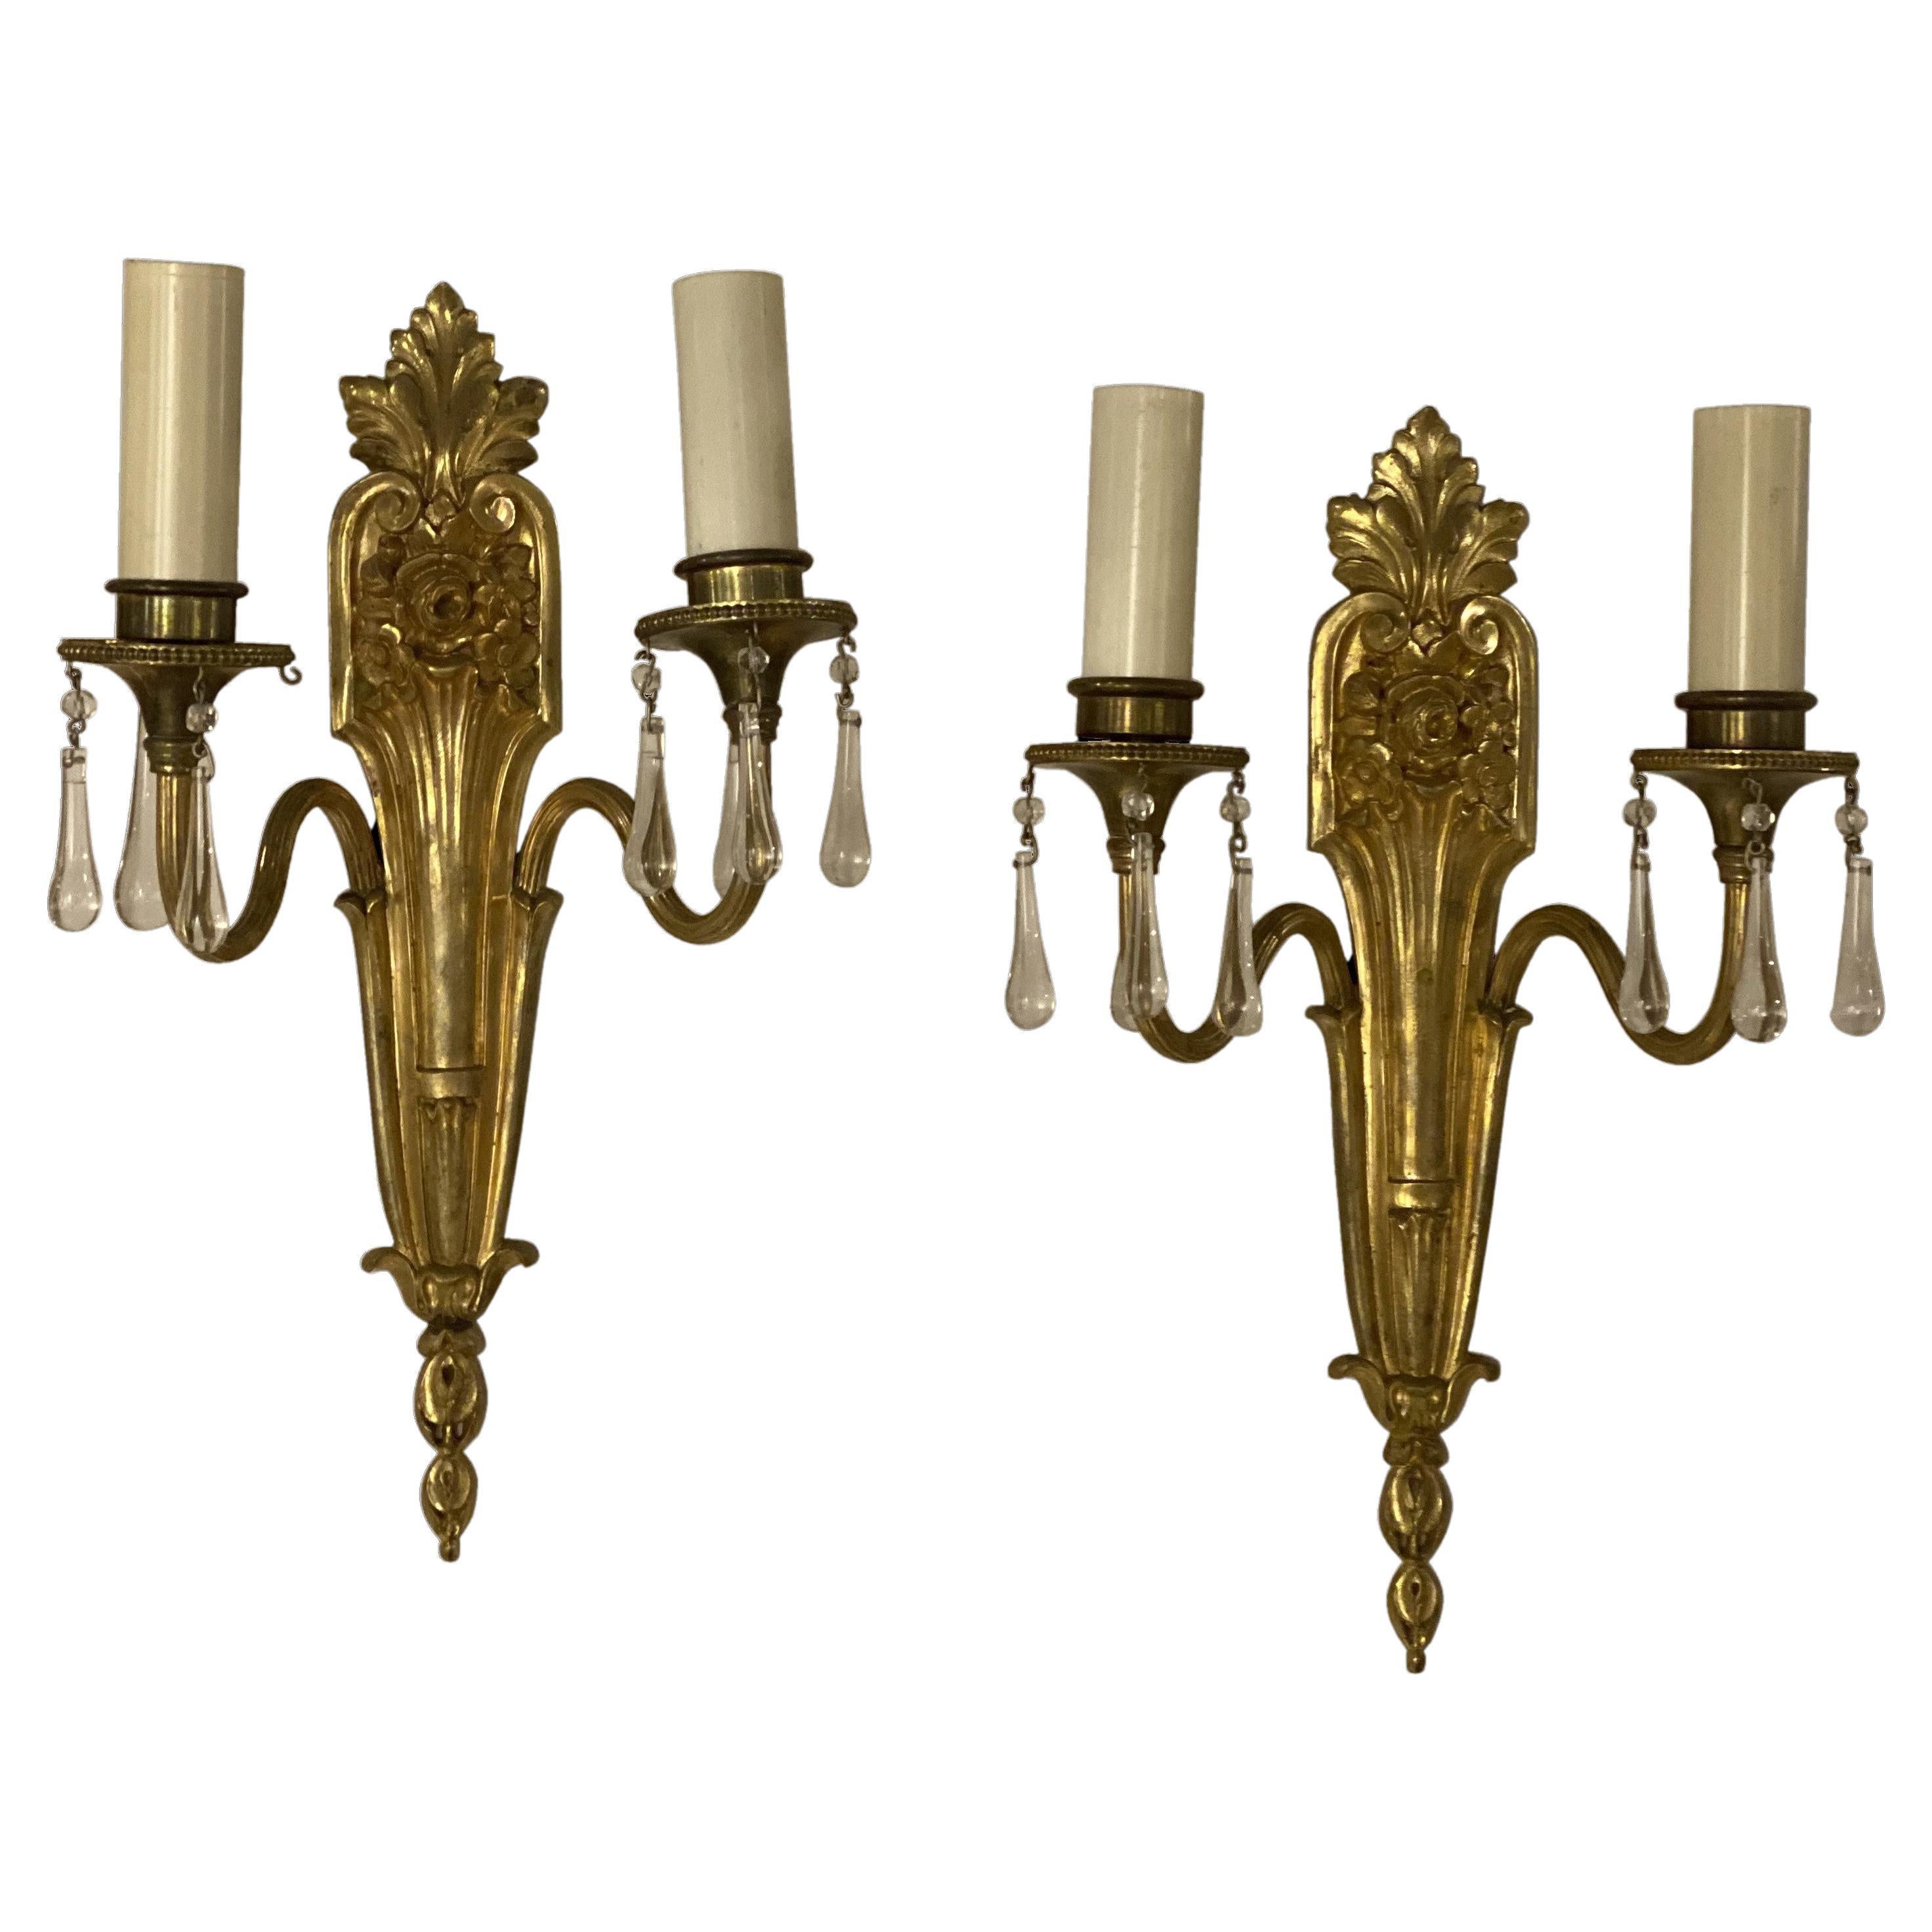 1920's Caldwell Double Lights Sconces with Hanging Crystals